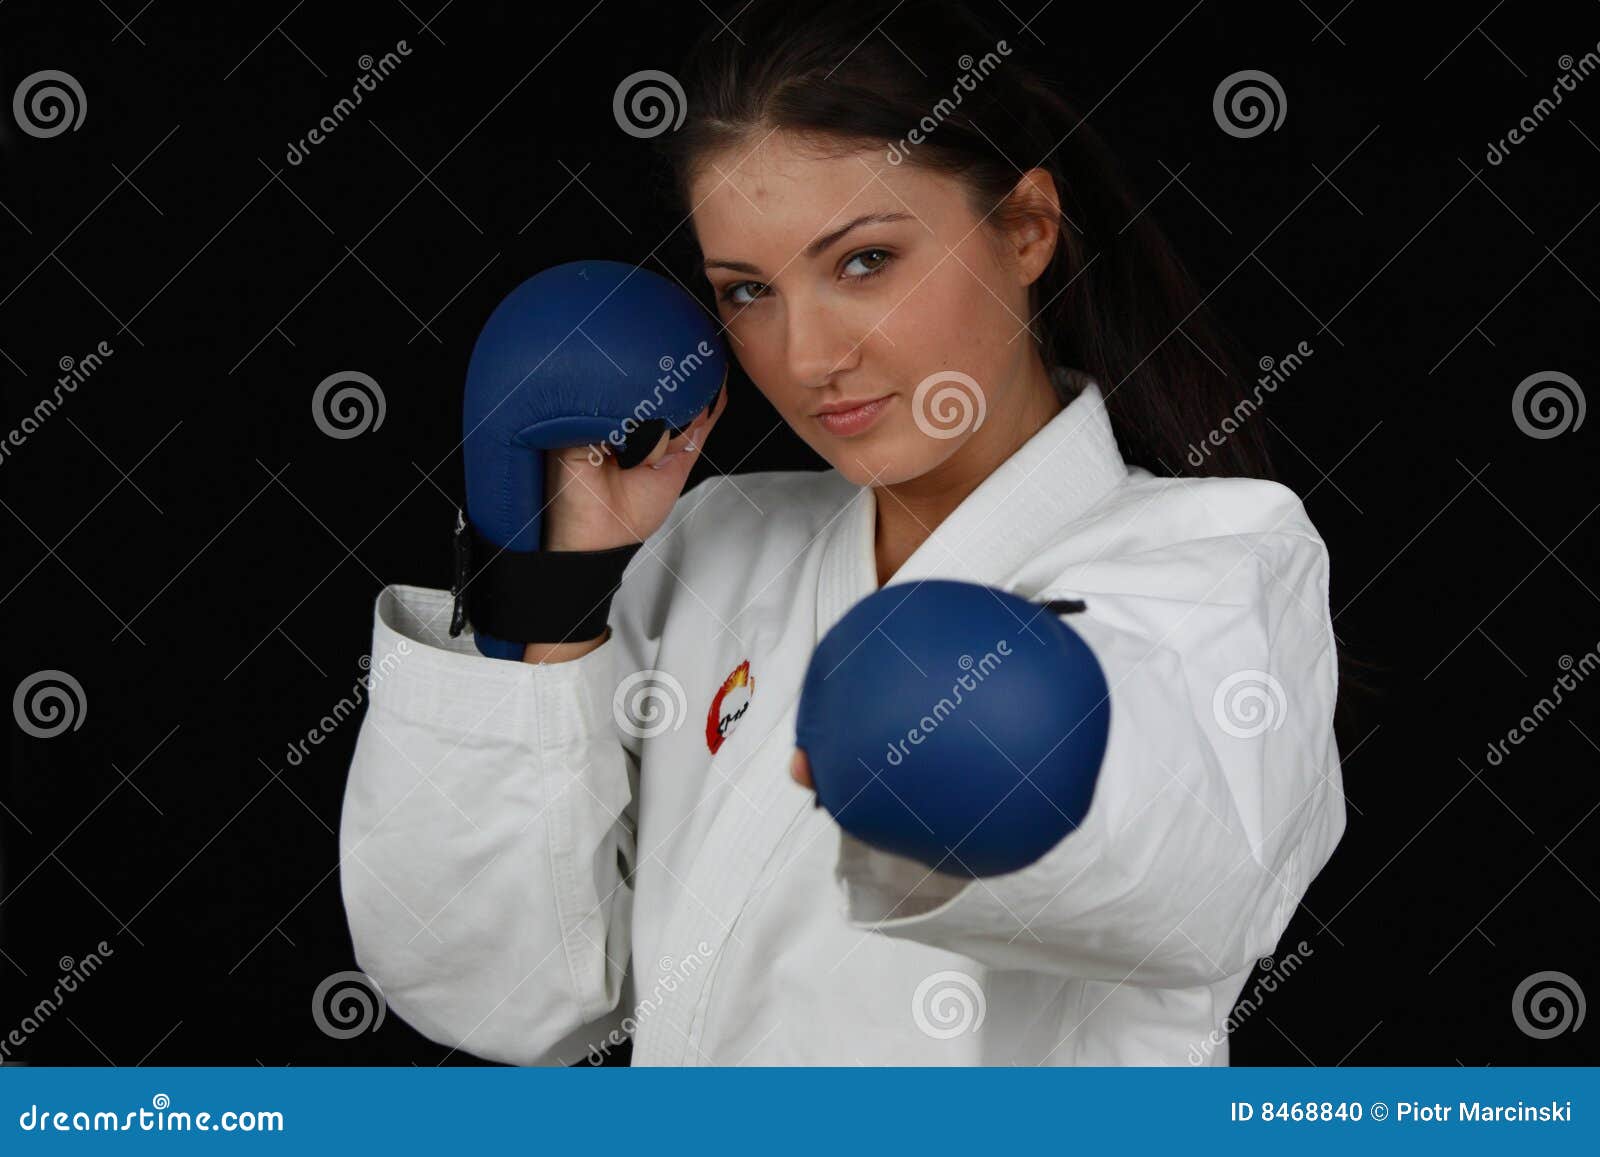 Karate Girl stock photo. Image of attractive, healthy - 8468840